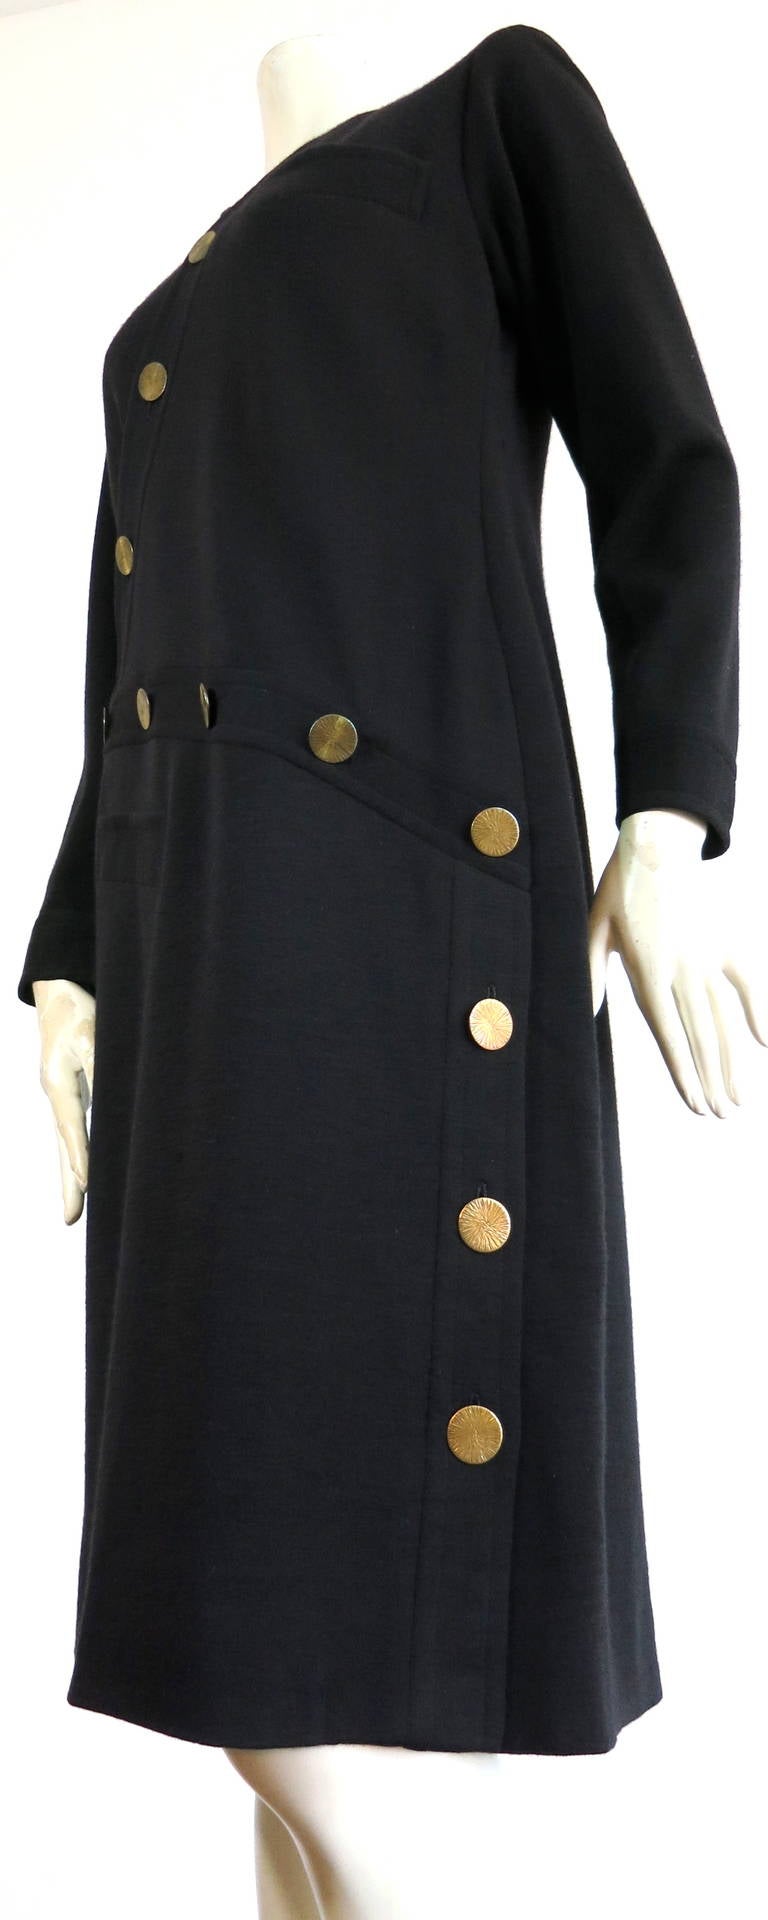 Vintage YVES SAINT LAURENT COUTURE Asymmetrical disk button dress In Good Condition For Sale In Newport Beach, CA